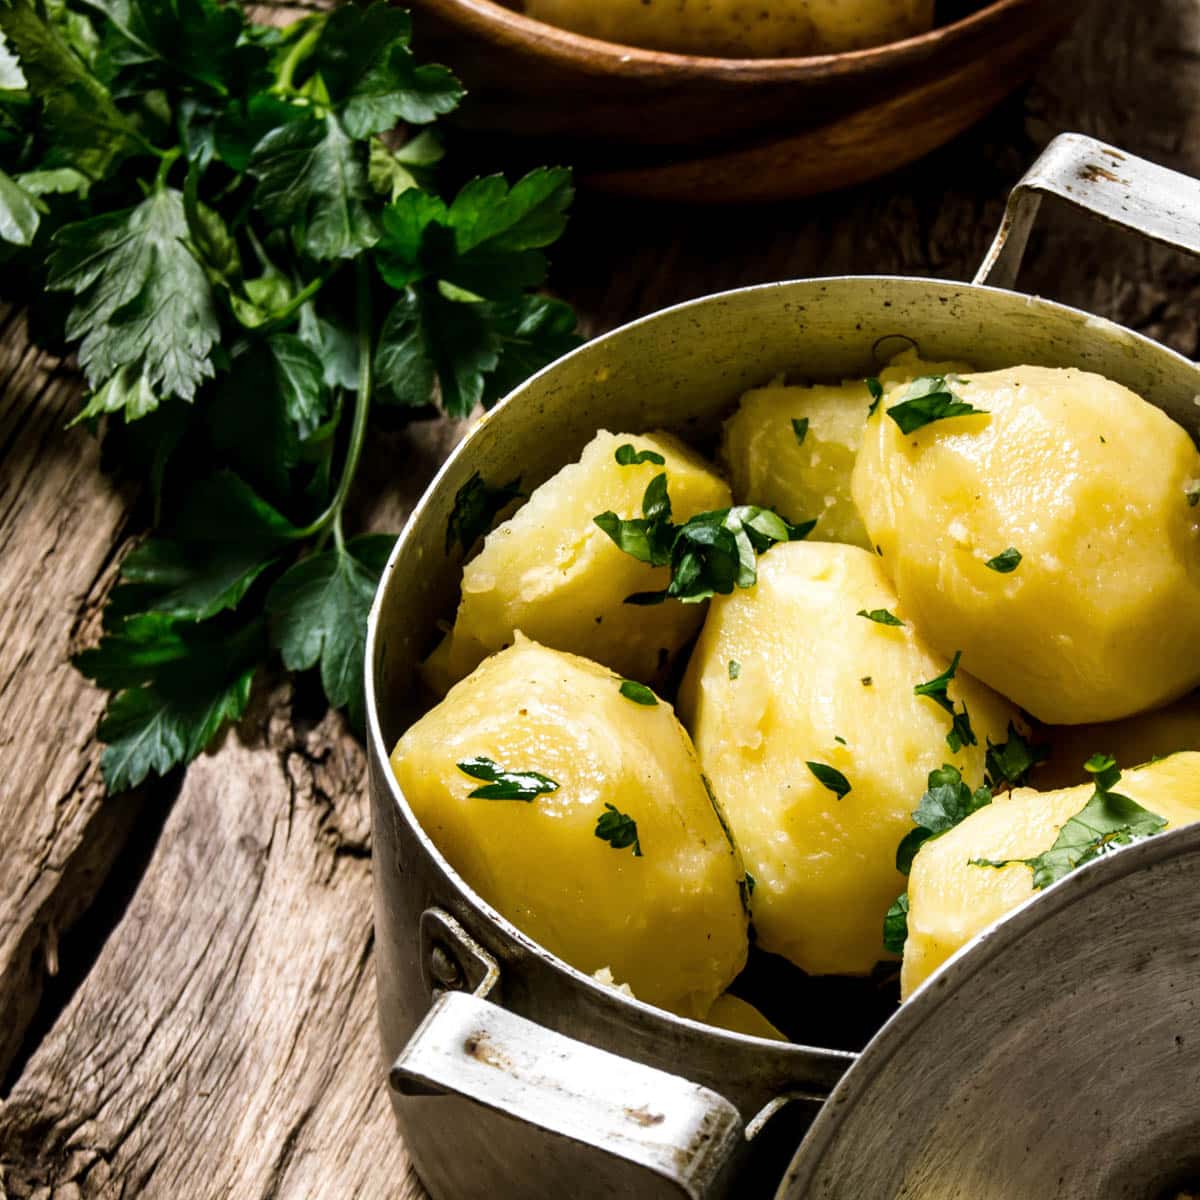 Boiled potatoes with fresh herbs in a pot on a rustic wooden table.